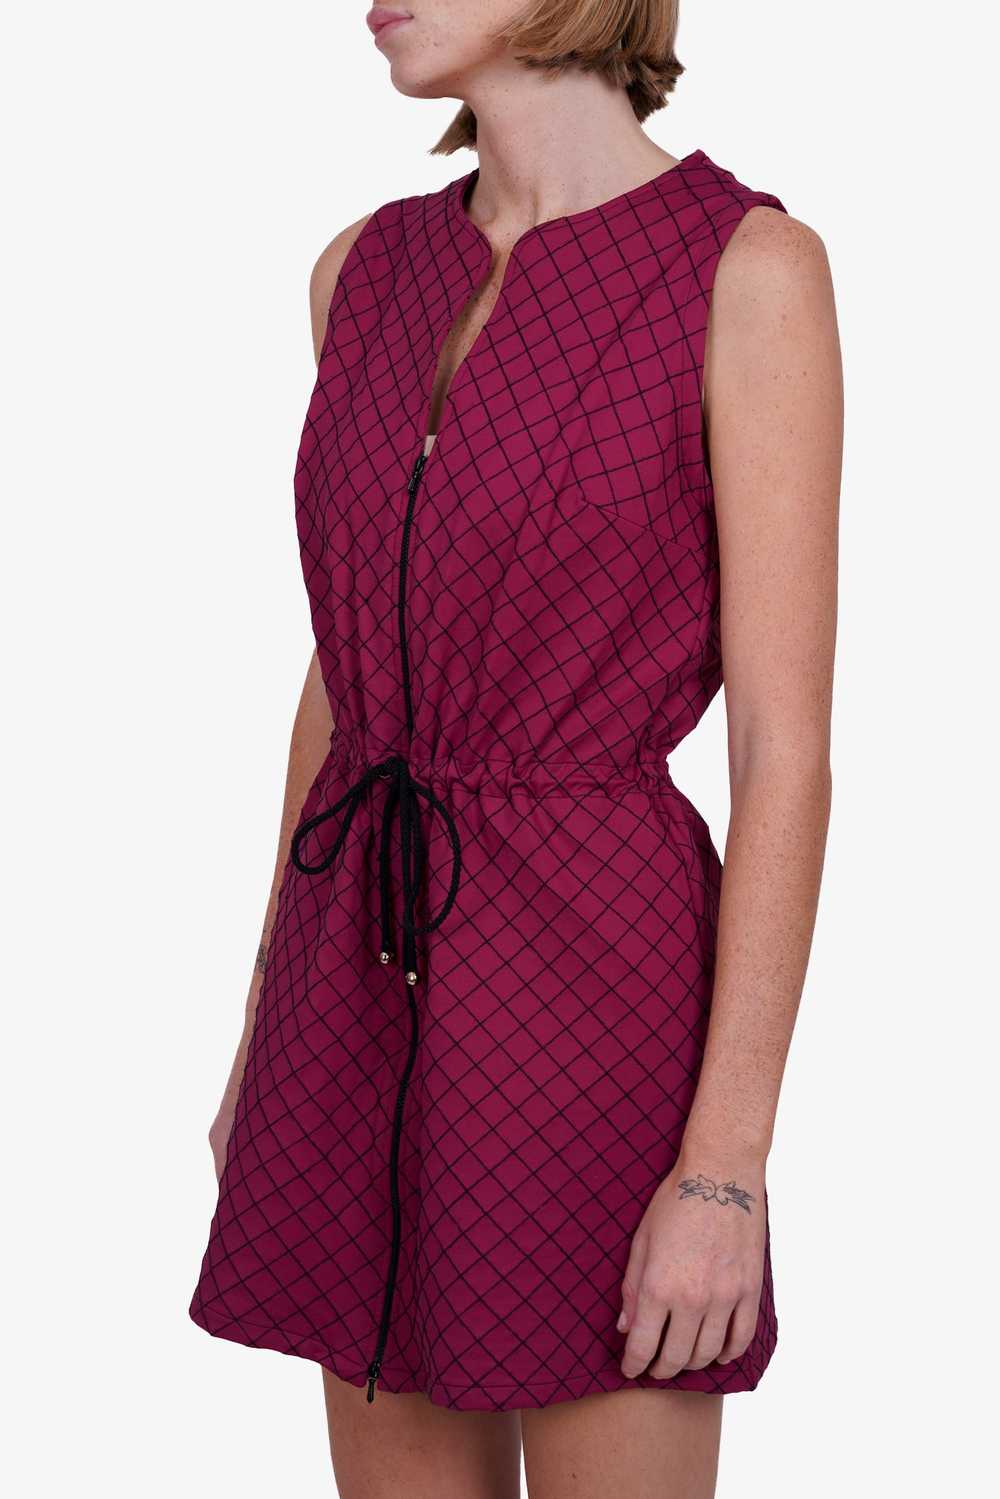 Pre-loved Chanel™ Purple Quilted Tunic Dress Size… - image 2